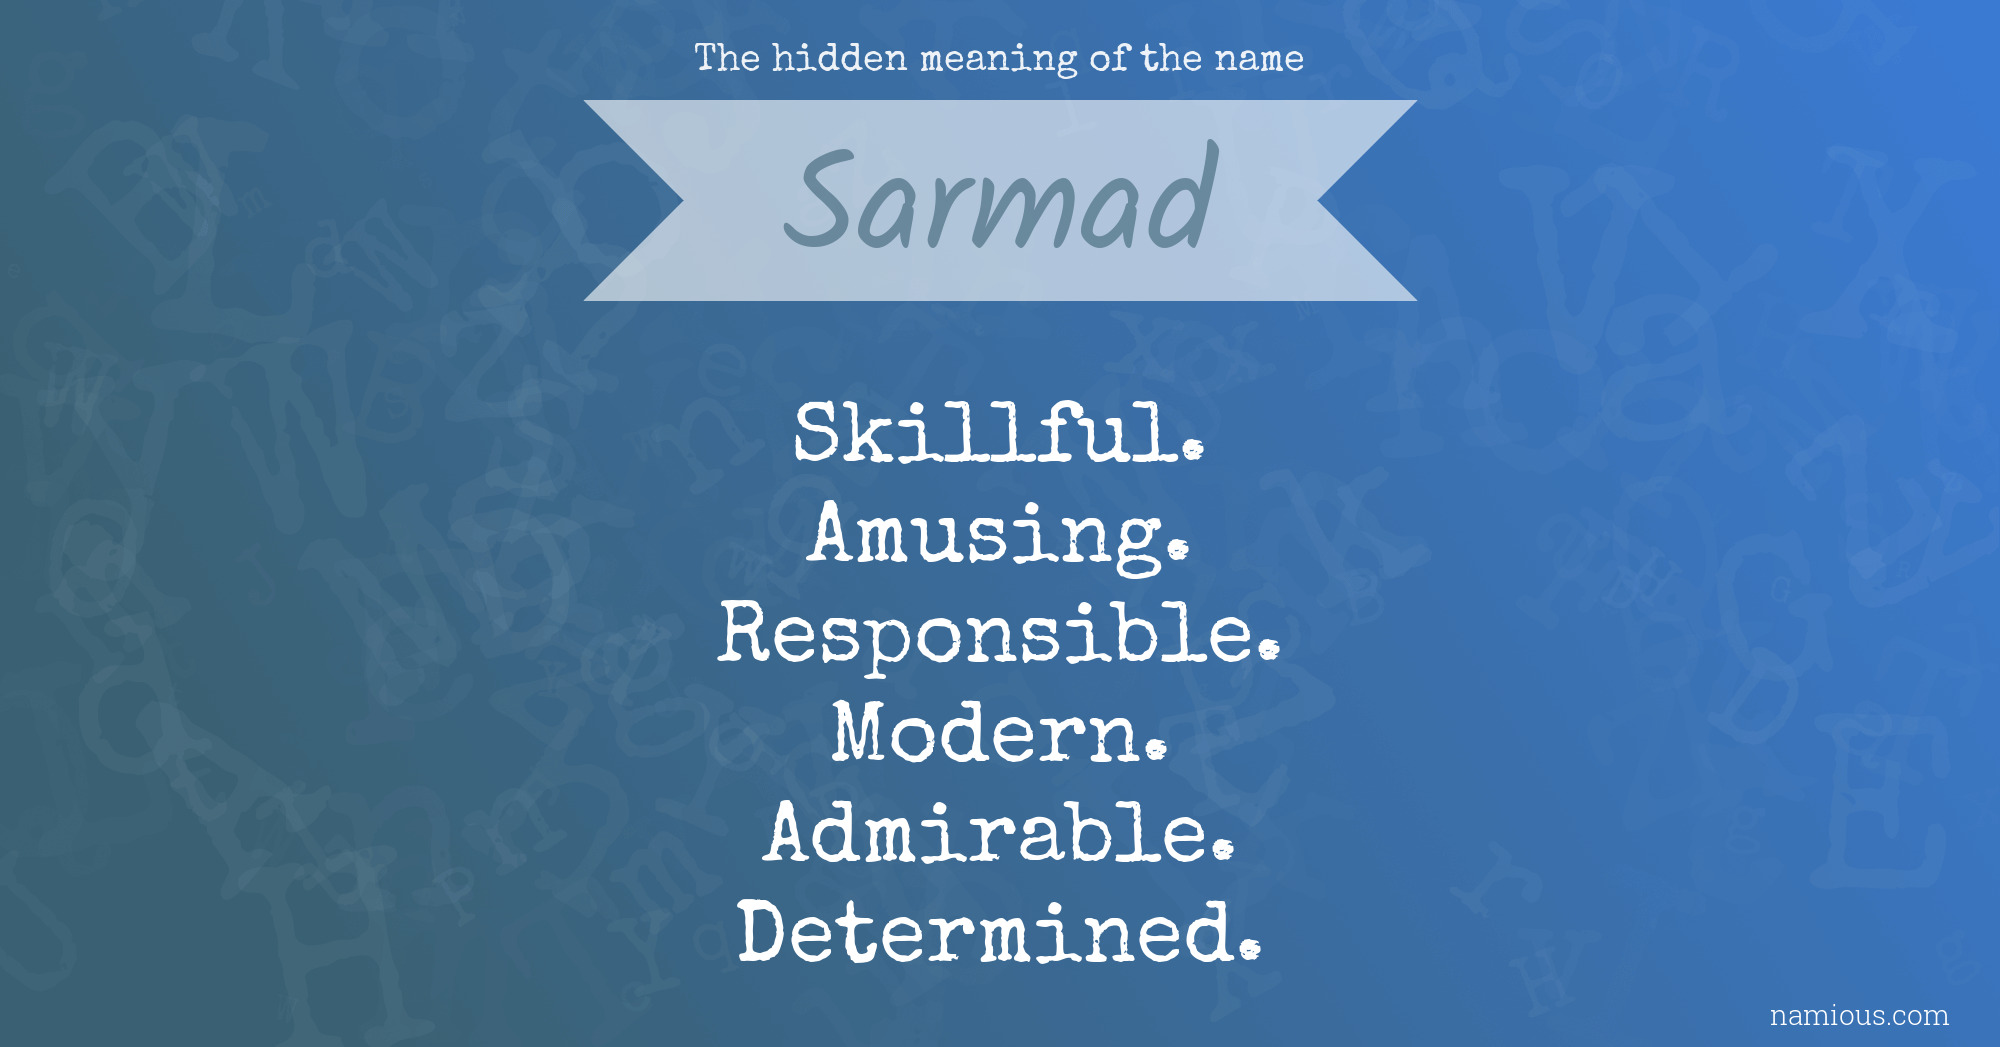 The hidden meaning of the name Sarmad